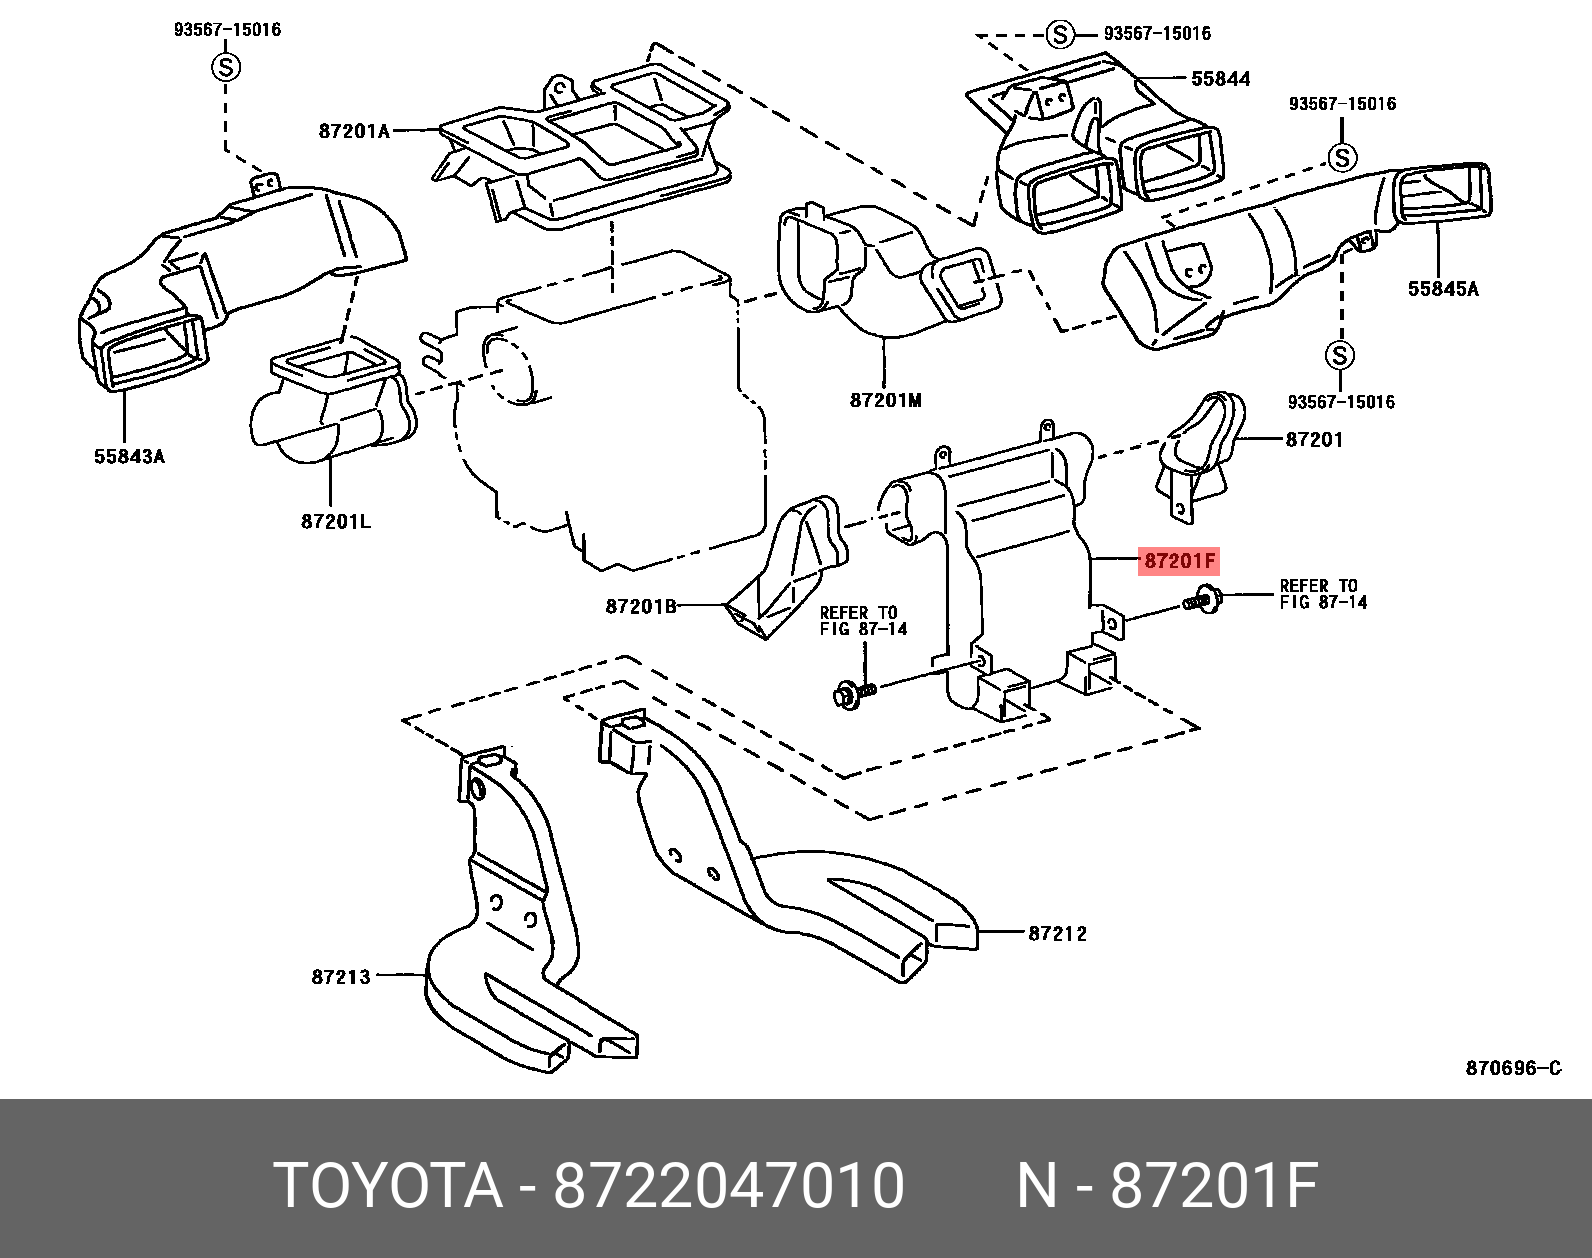 PRIUS (PLUG-IN) LEASE 200912 - 201010, DUCT SUB-ASSY, AIR, NO.3